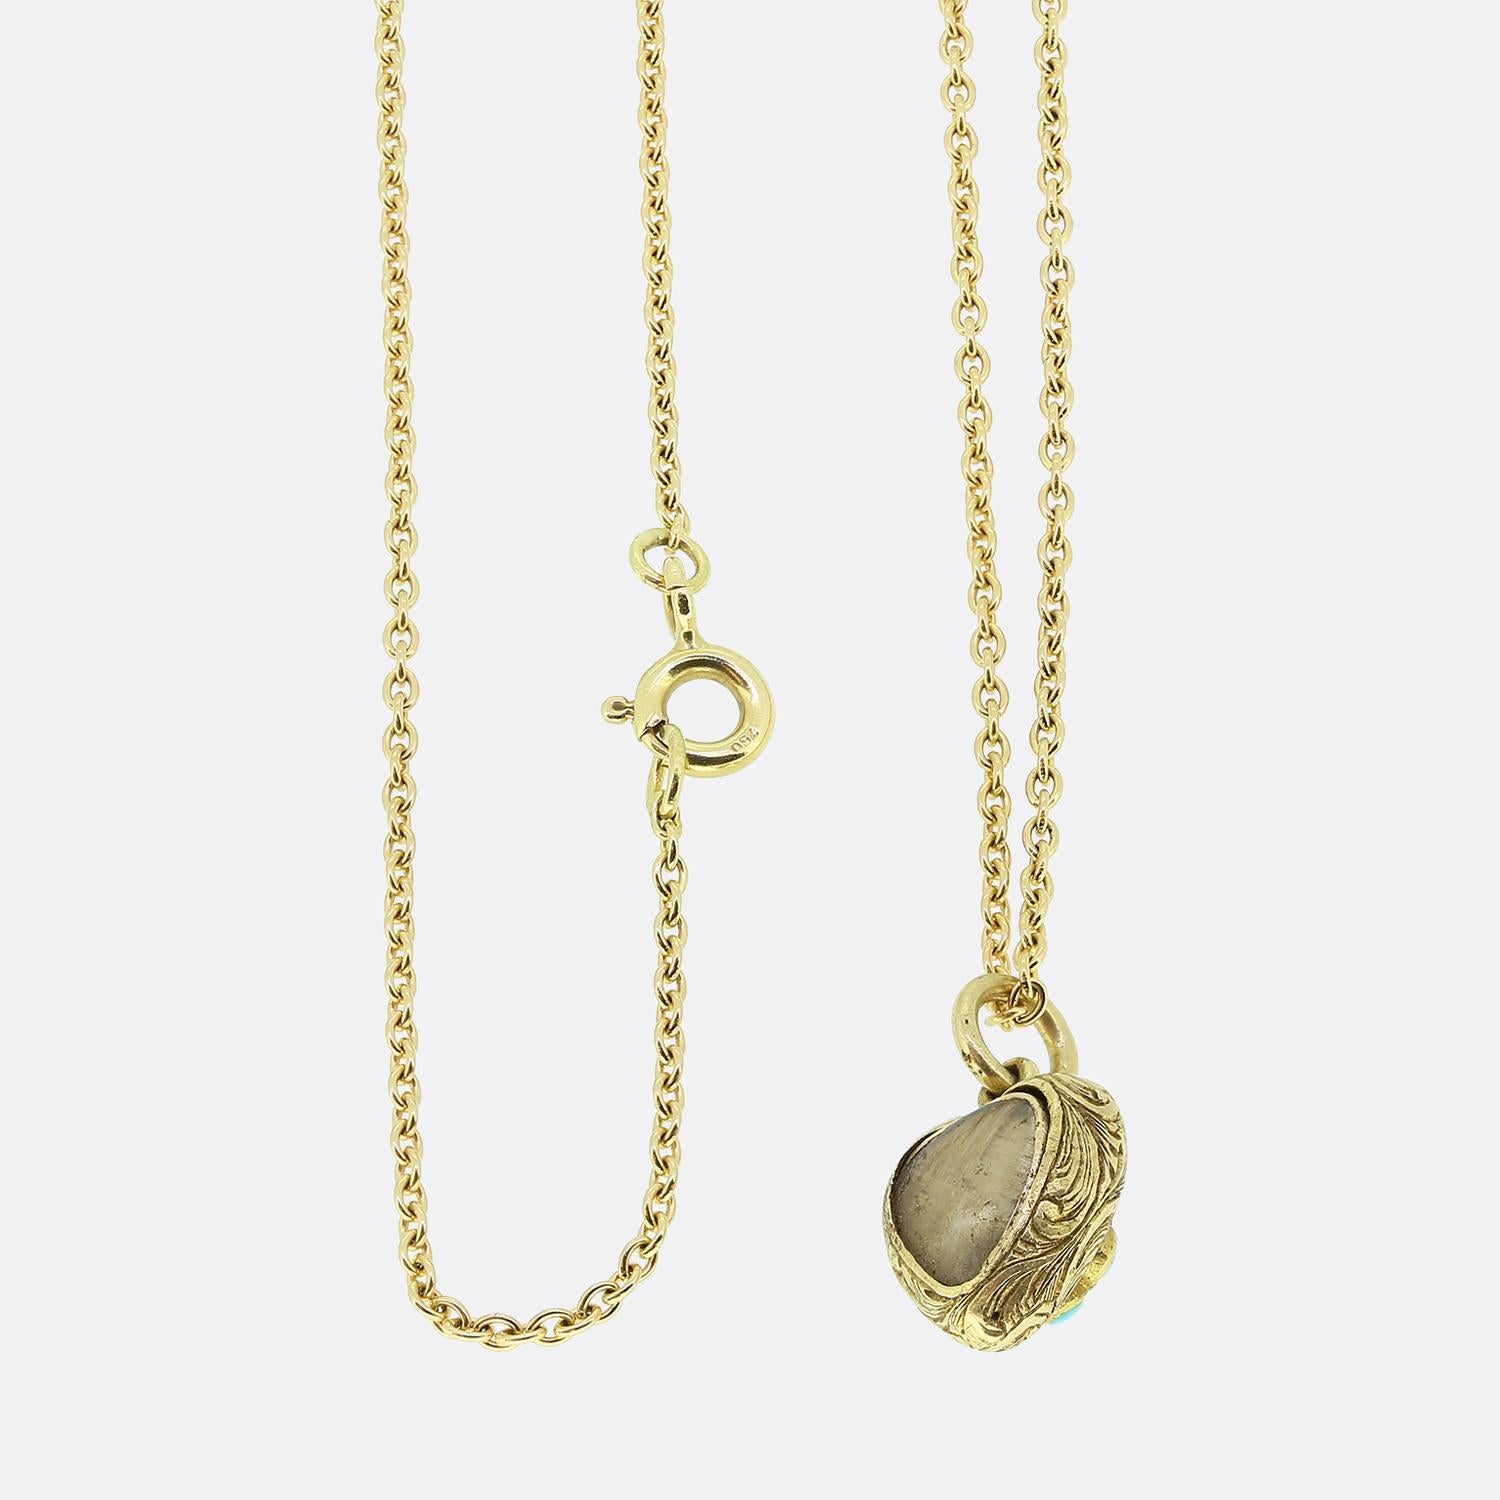 Here we have a delightful turquoise set locket necklace. This antique pendant has been crafted from 15ct yellow gold into the the shape of a little love heart and expertly engraved with a stunning fauna and floral design. This decoration acts as the